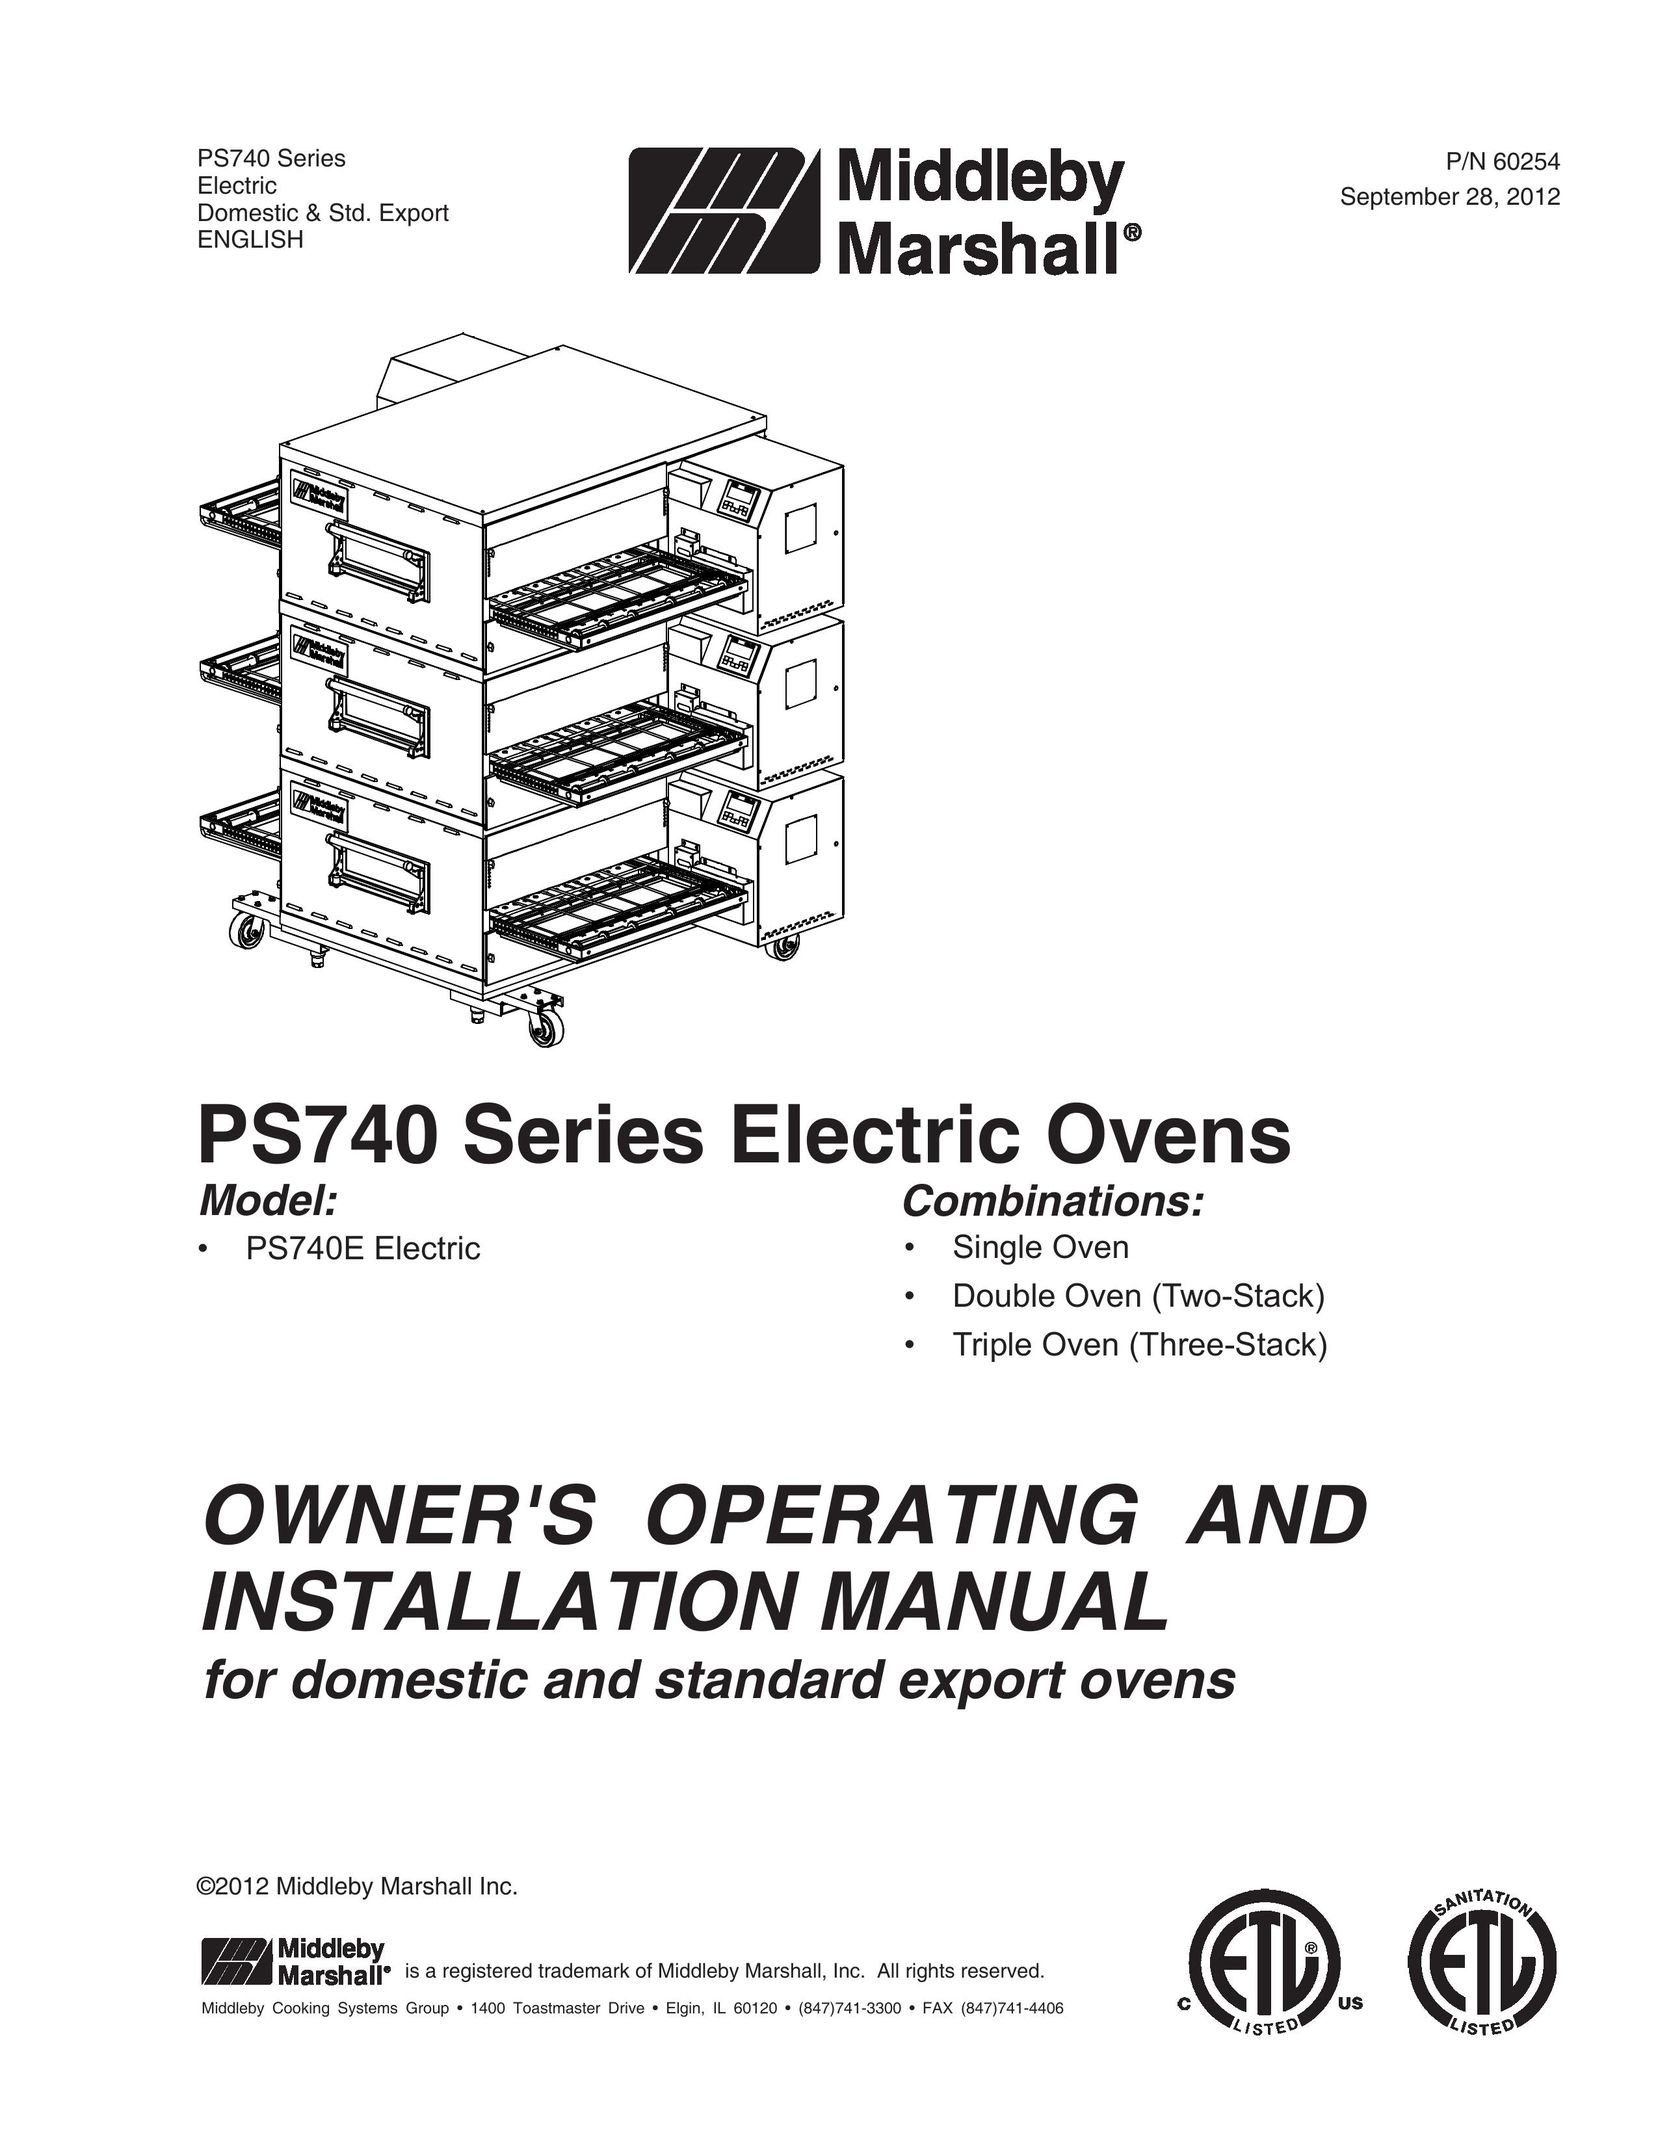 Middleby Marshall 60254 Oven User Manual